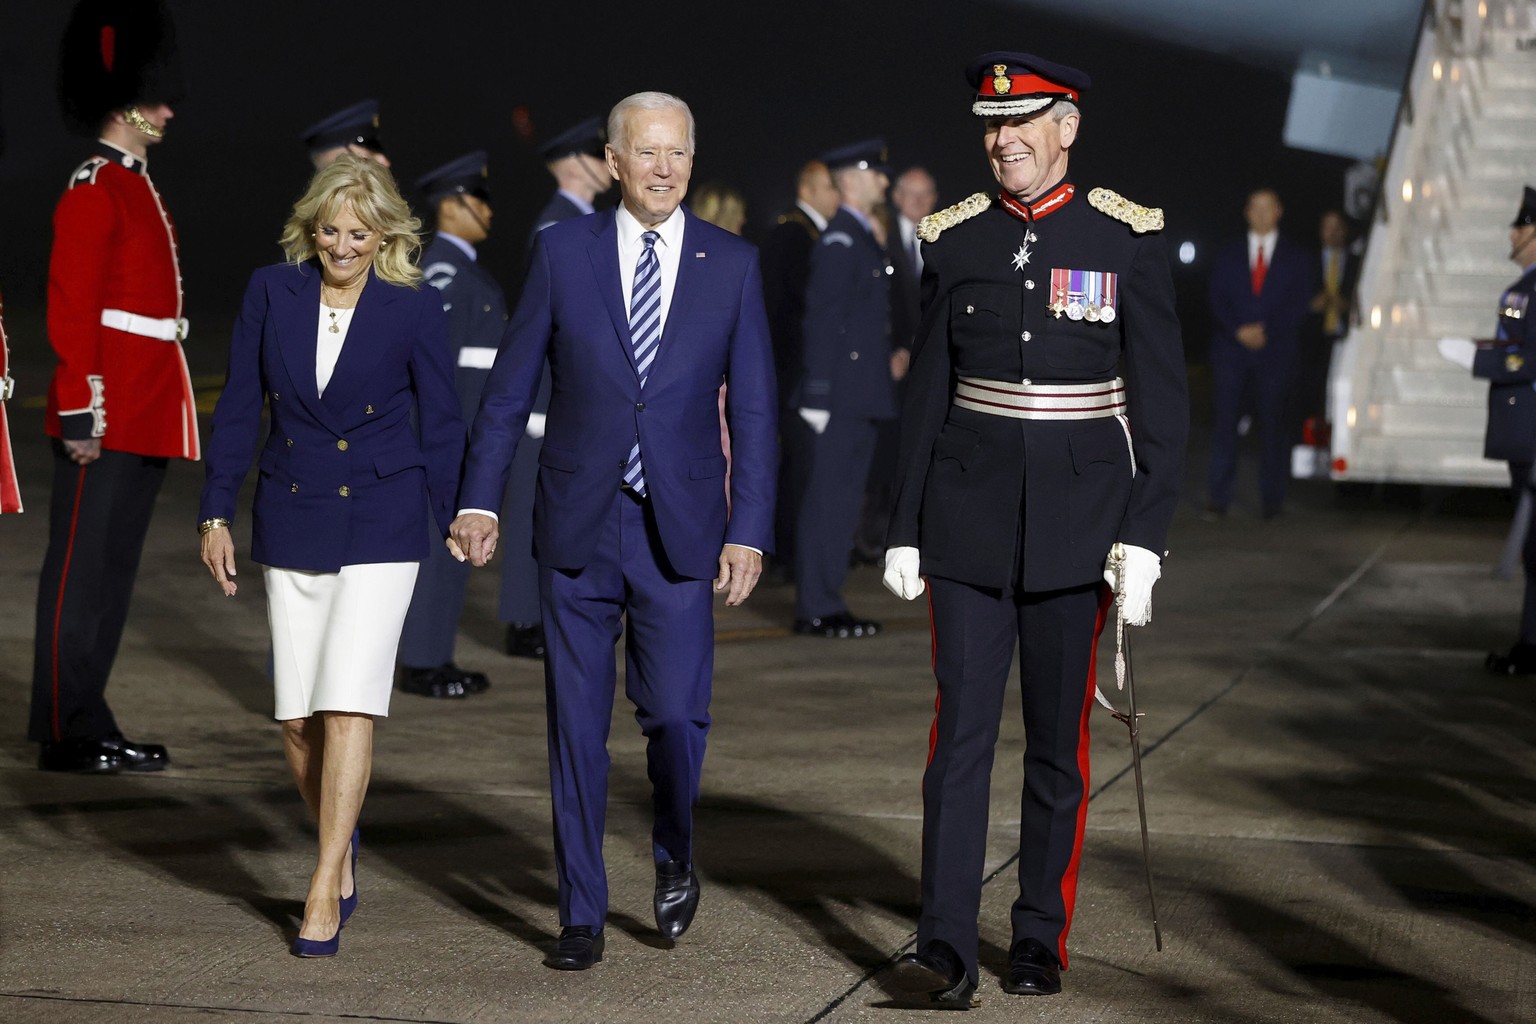 U.S. President Joe Biden and first lady Jill Biden arrive on Air Force One at Cornwall Airport Newquay, near Newquay, England, ahead of the G7 summit in Cornwall, early Thursday, June 10, 2021. (Phil  ...